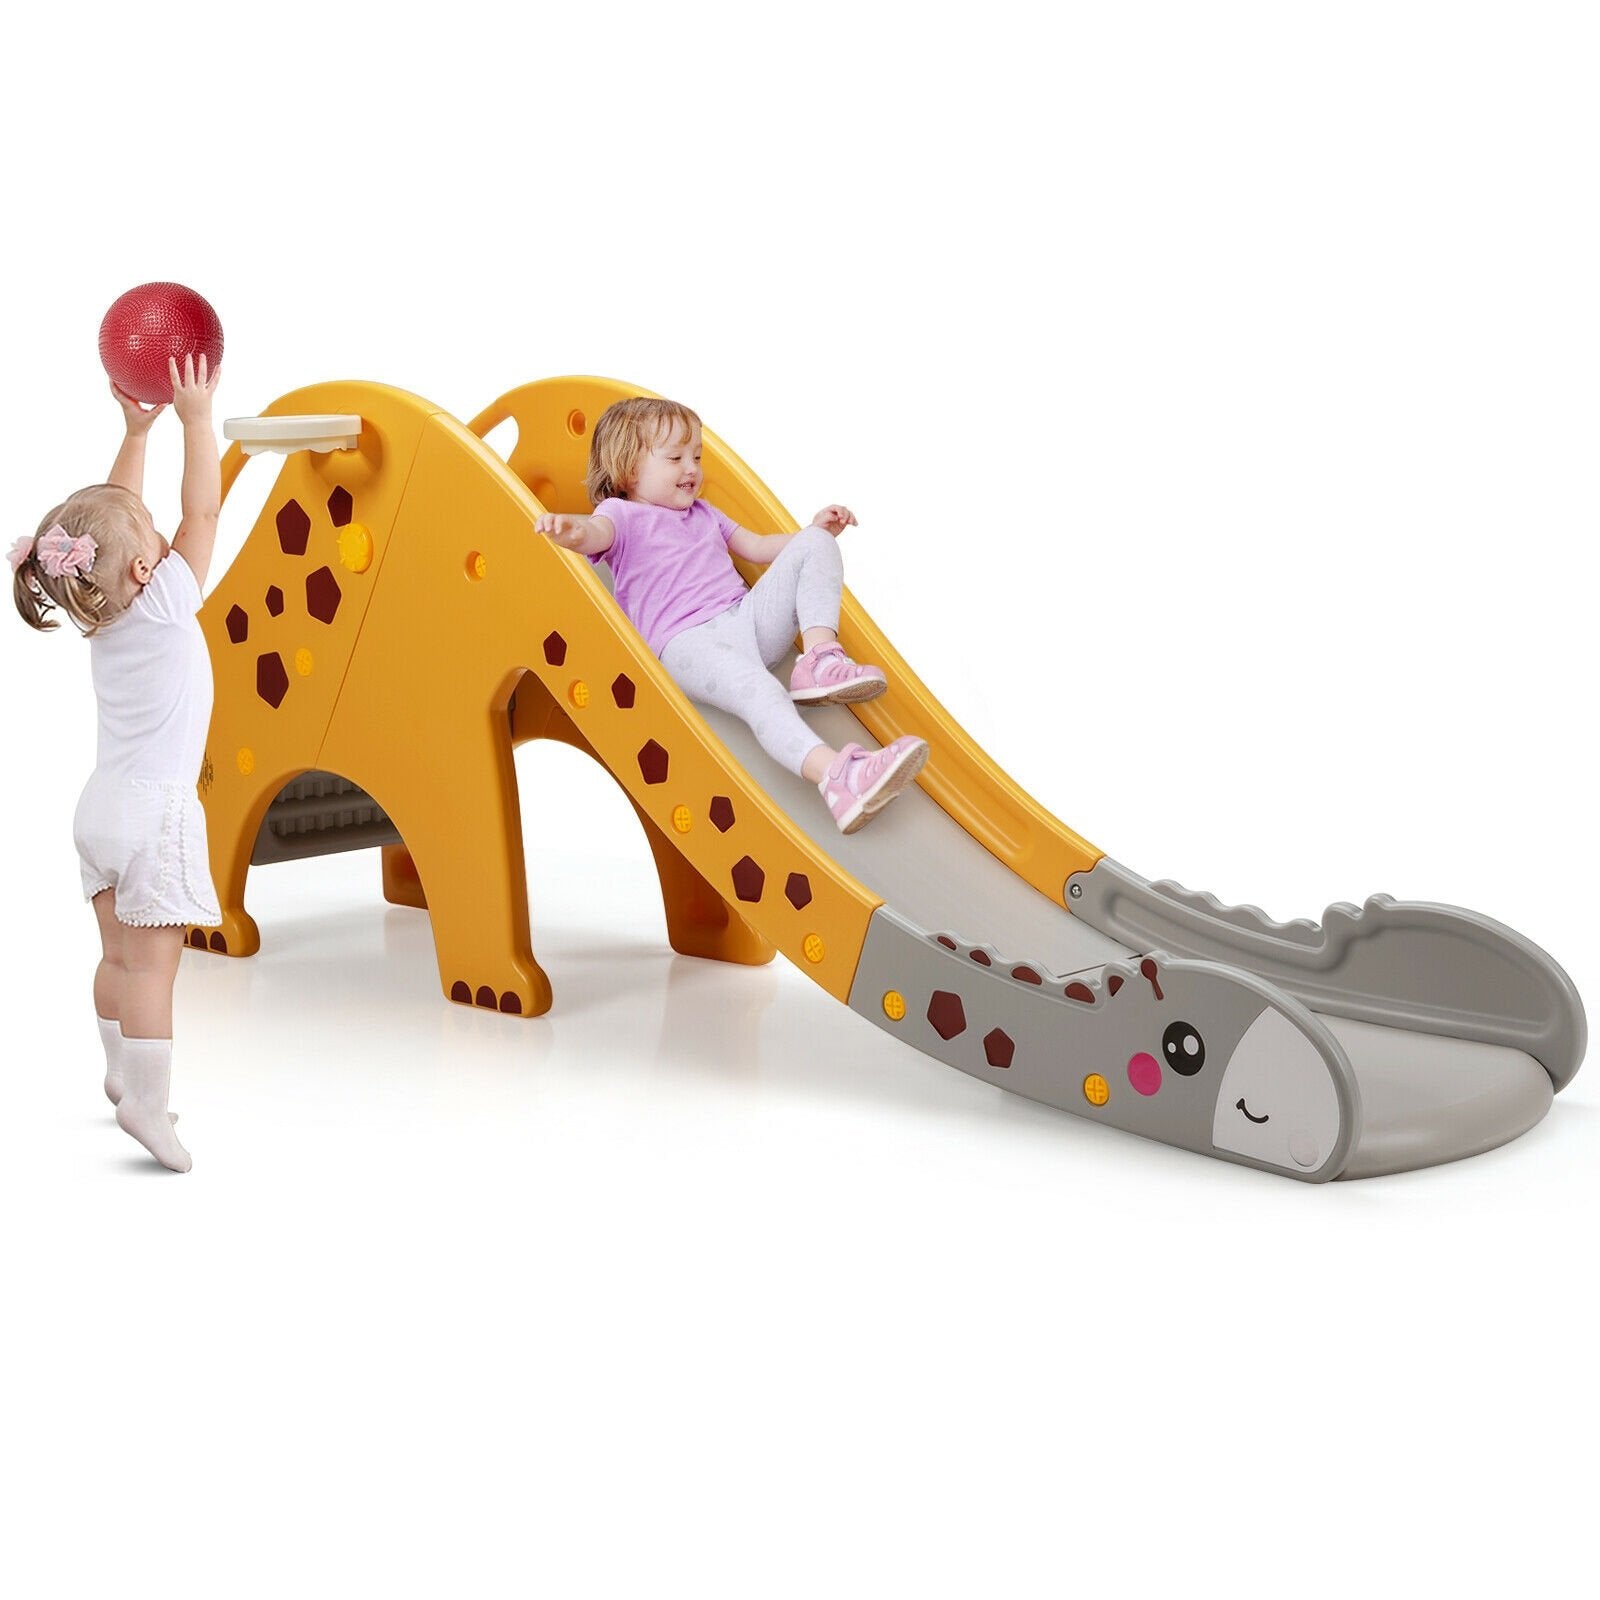 3-in-1 Kids Climber Slide Play Set with Basketball Hoop, Yellow - Gallery Canada